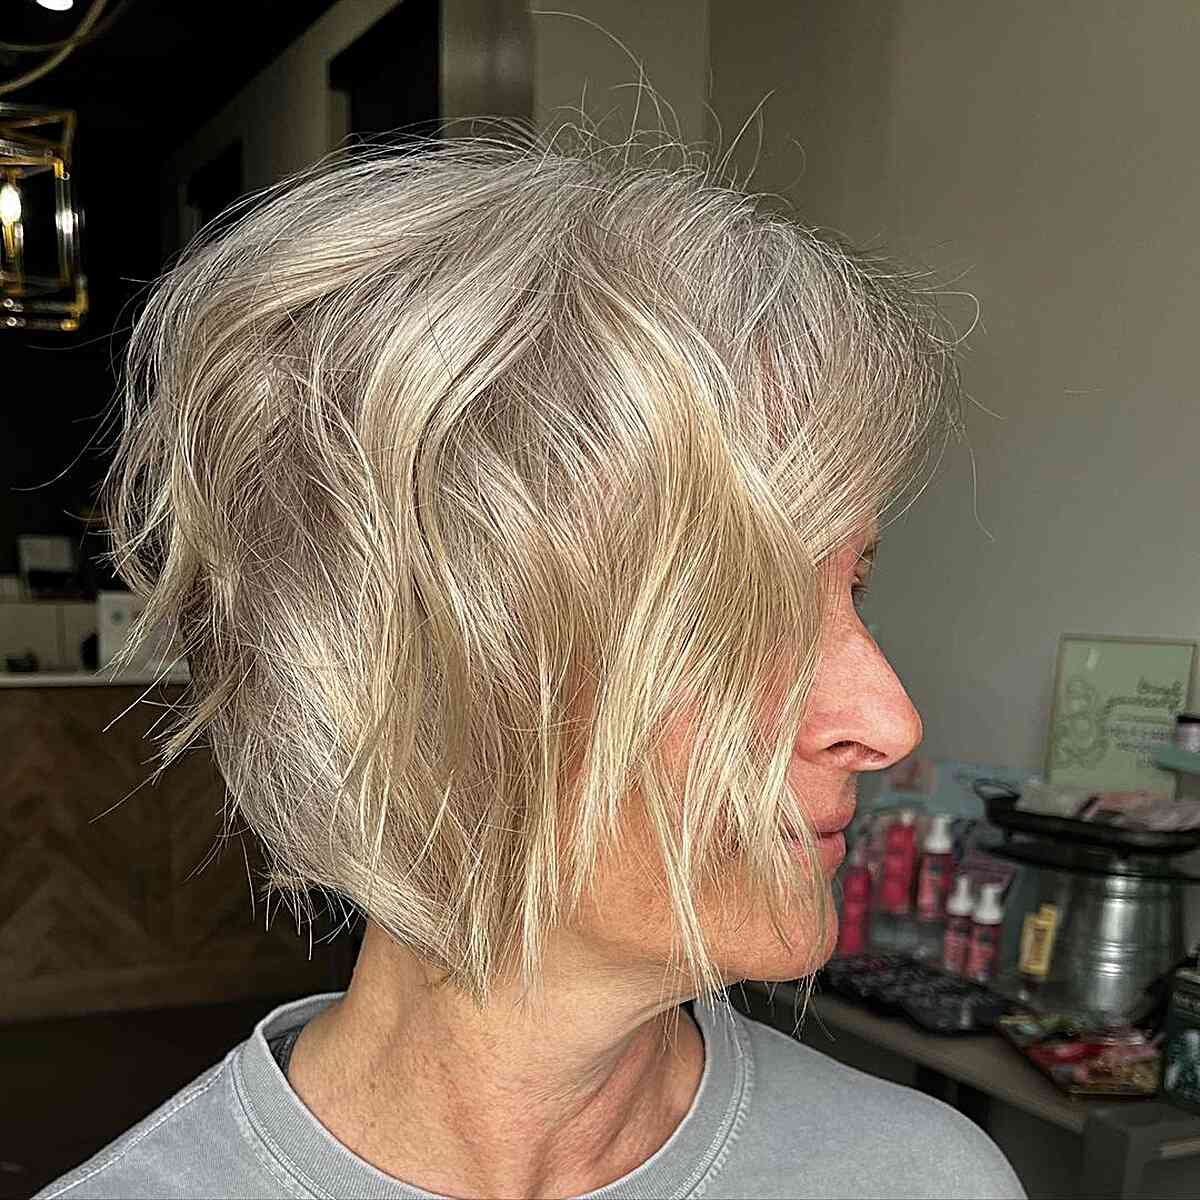 Short Layered, Textured Fine Hair for Older Women with White Hair